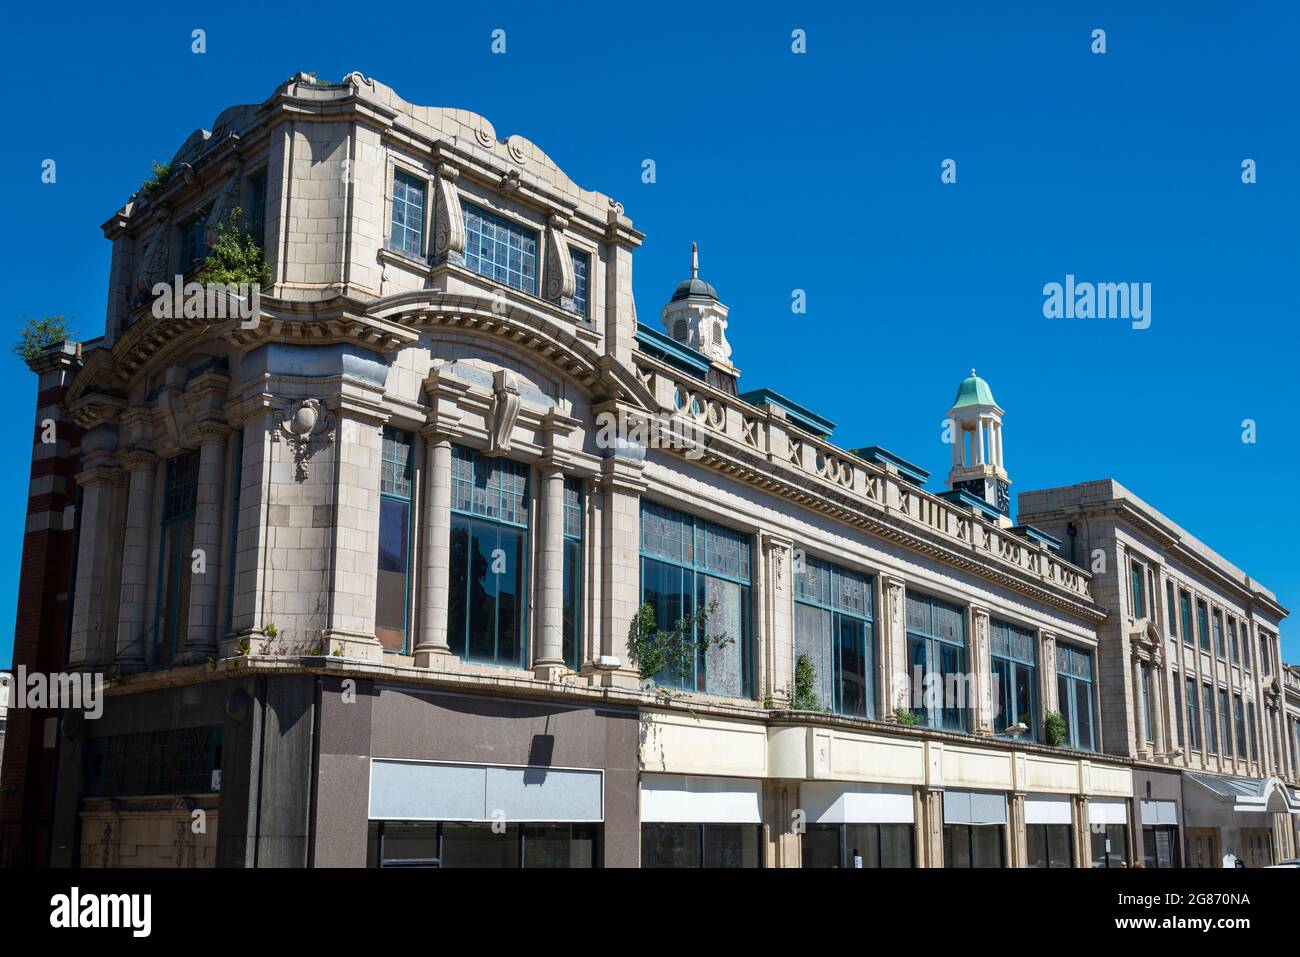 The old Co-op Emporium building in Chestergate, Stockport, Greater Manchester, England. Stock Photo